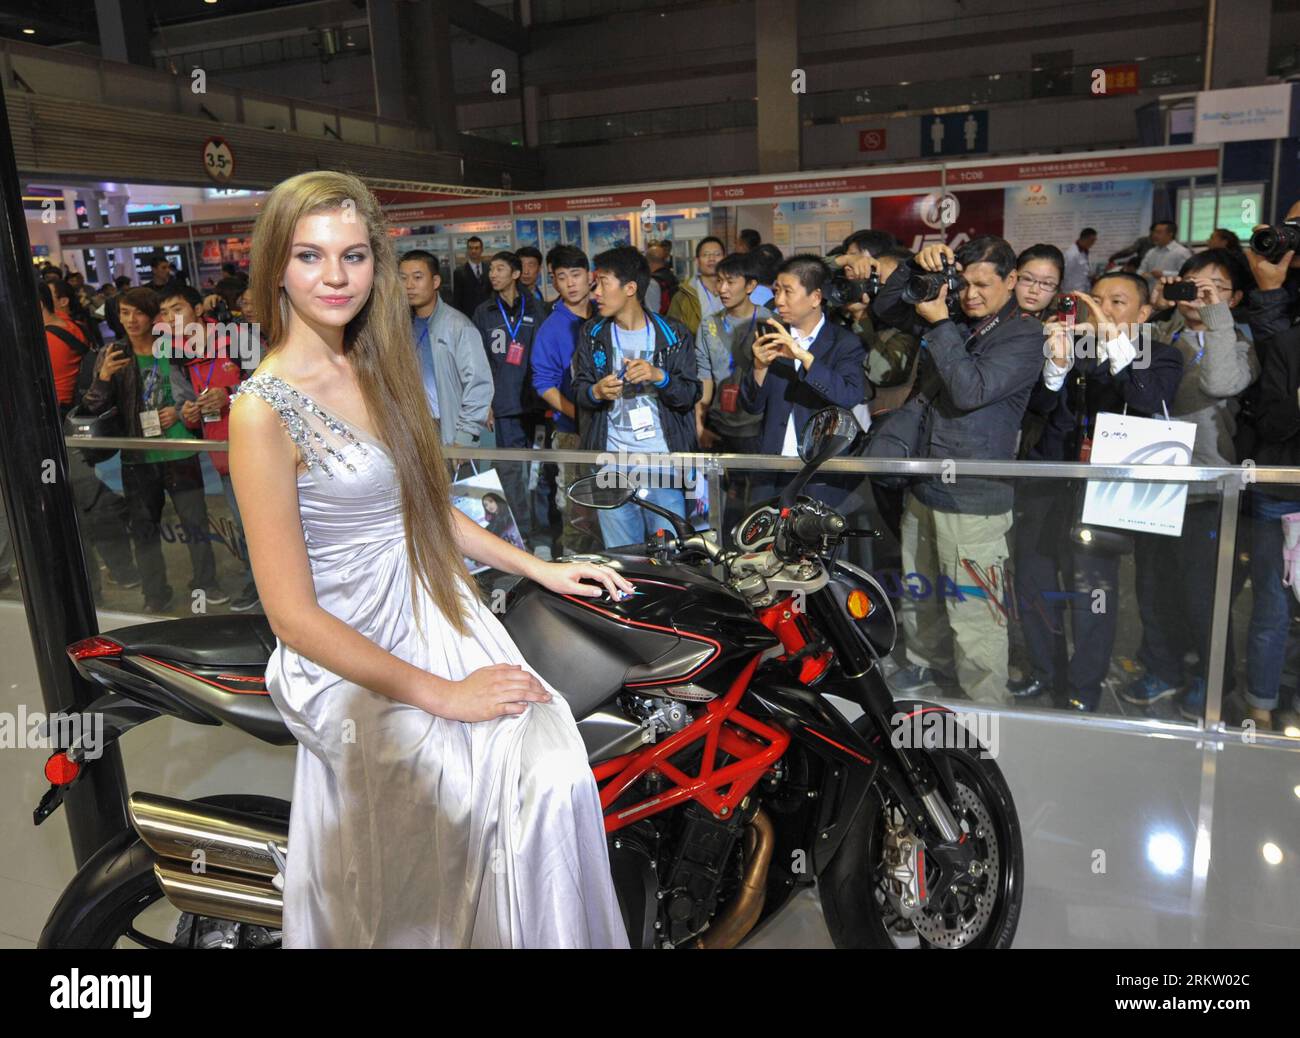 Bildnummer: 58577703  Datum: 11.10.2012  Copyright: imago/Xinhua (121011) -- CHONGQING, Oct. 11, 2012 (Xinhua) -- A model sits on a motorcycle exhibited in the 11th China International Motorcycle Trade Exhibition in southwest China s Chongqing Municipality, Oct. 11, 2012. More than 400 motorcycle companies from 10 countries and regions attended the four-day expo kicked off on Thursday. About 100 international traders also participated in the fair, and the purchase sum is expected to exceed 100 million U.S. dollars. (Xinhua/Liu Chan) (hy) CHINA-CHONGQING-MOTOR CYCLE EXPO-OPENING (CN) PUBLICATIO Stock Photo